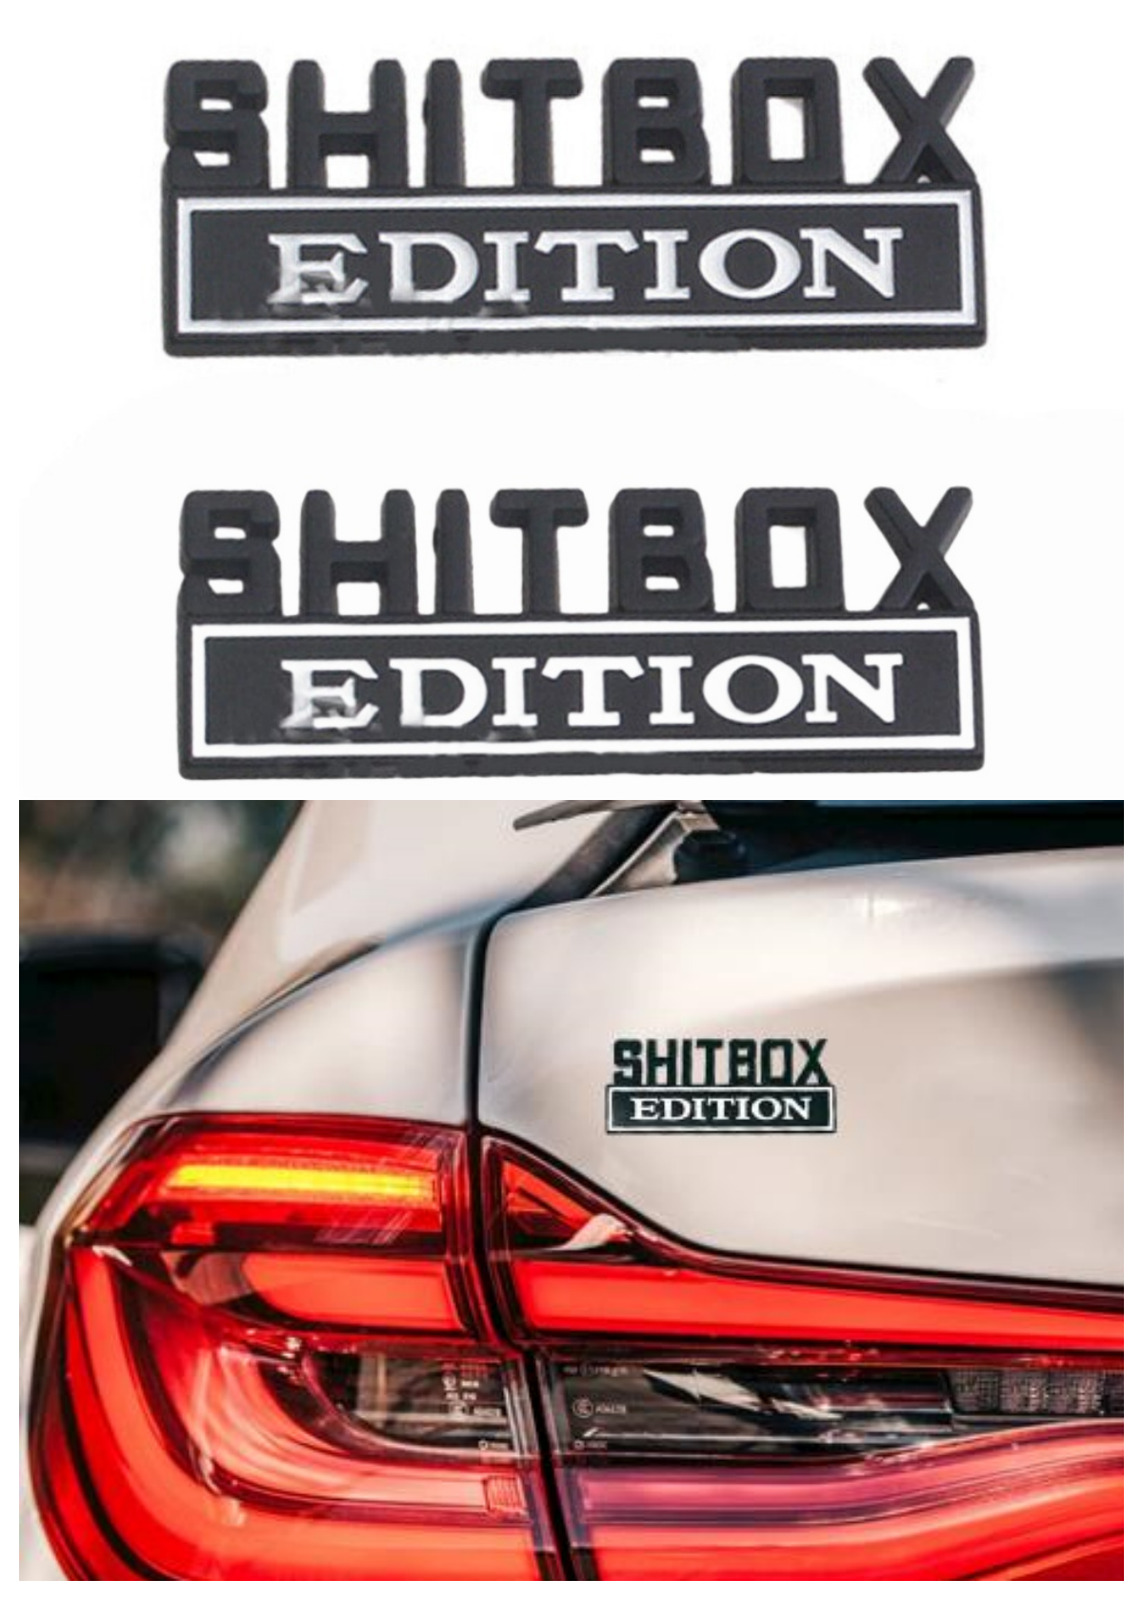 2X 3D SHITBOX EDITION Black+White Emblem Decal Badge Stickers For Universal Car